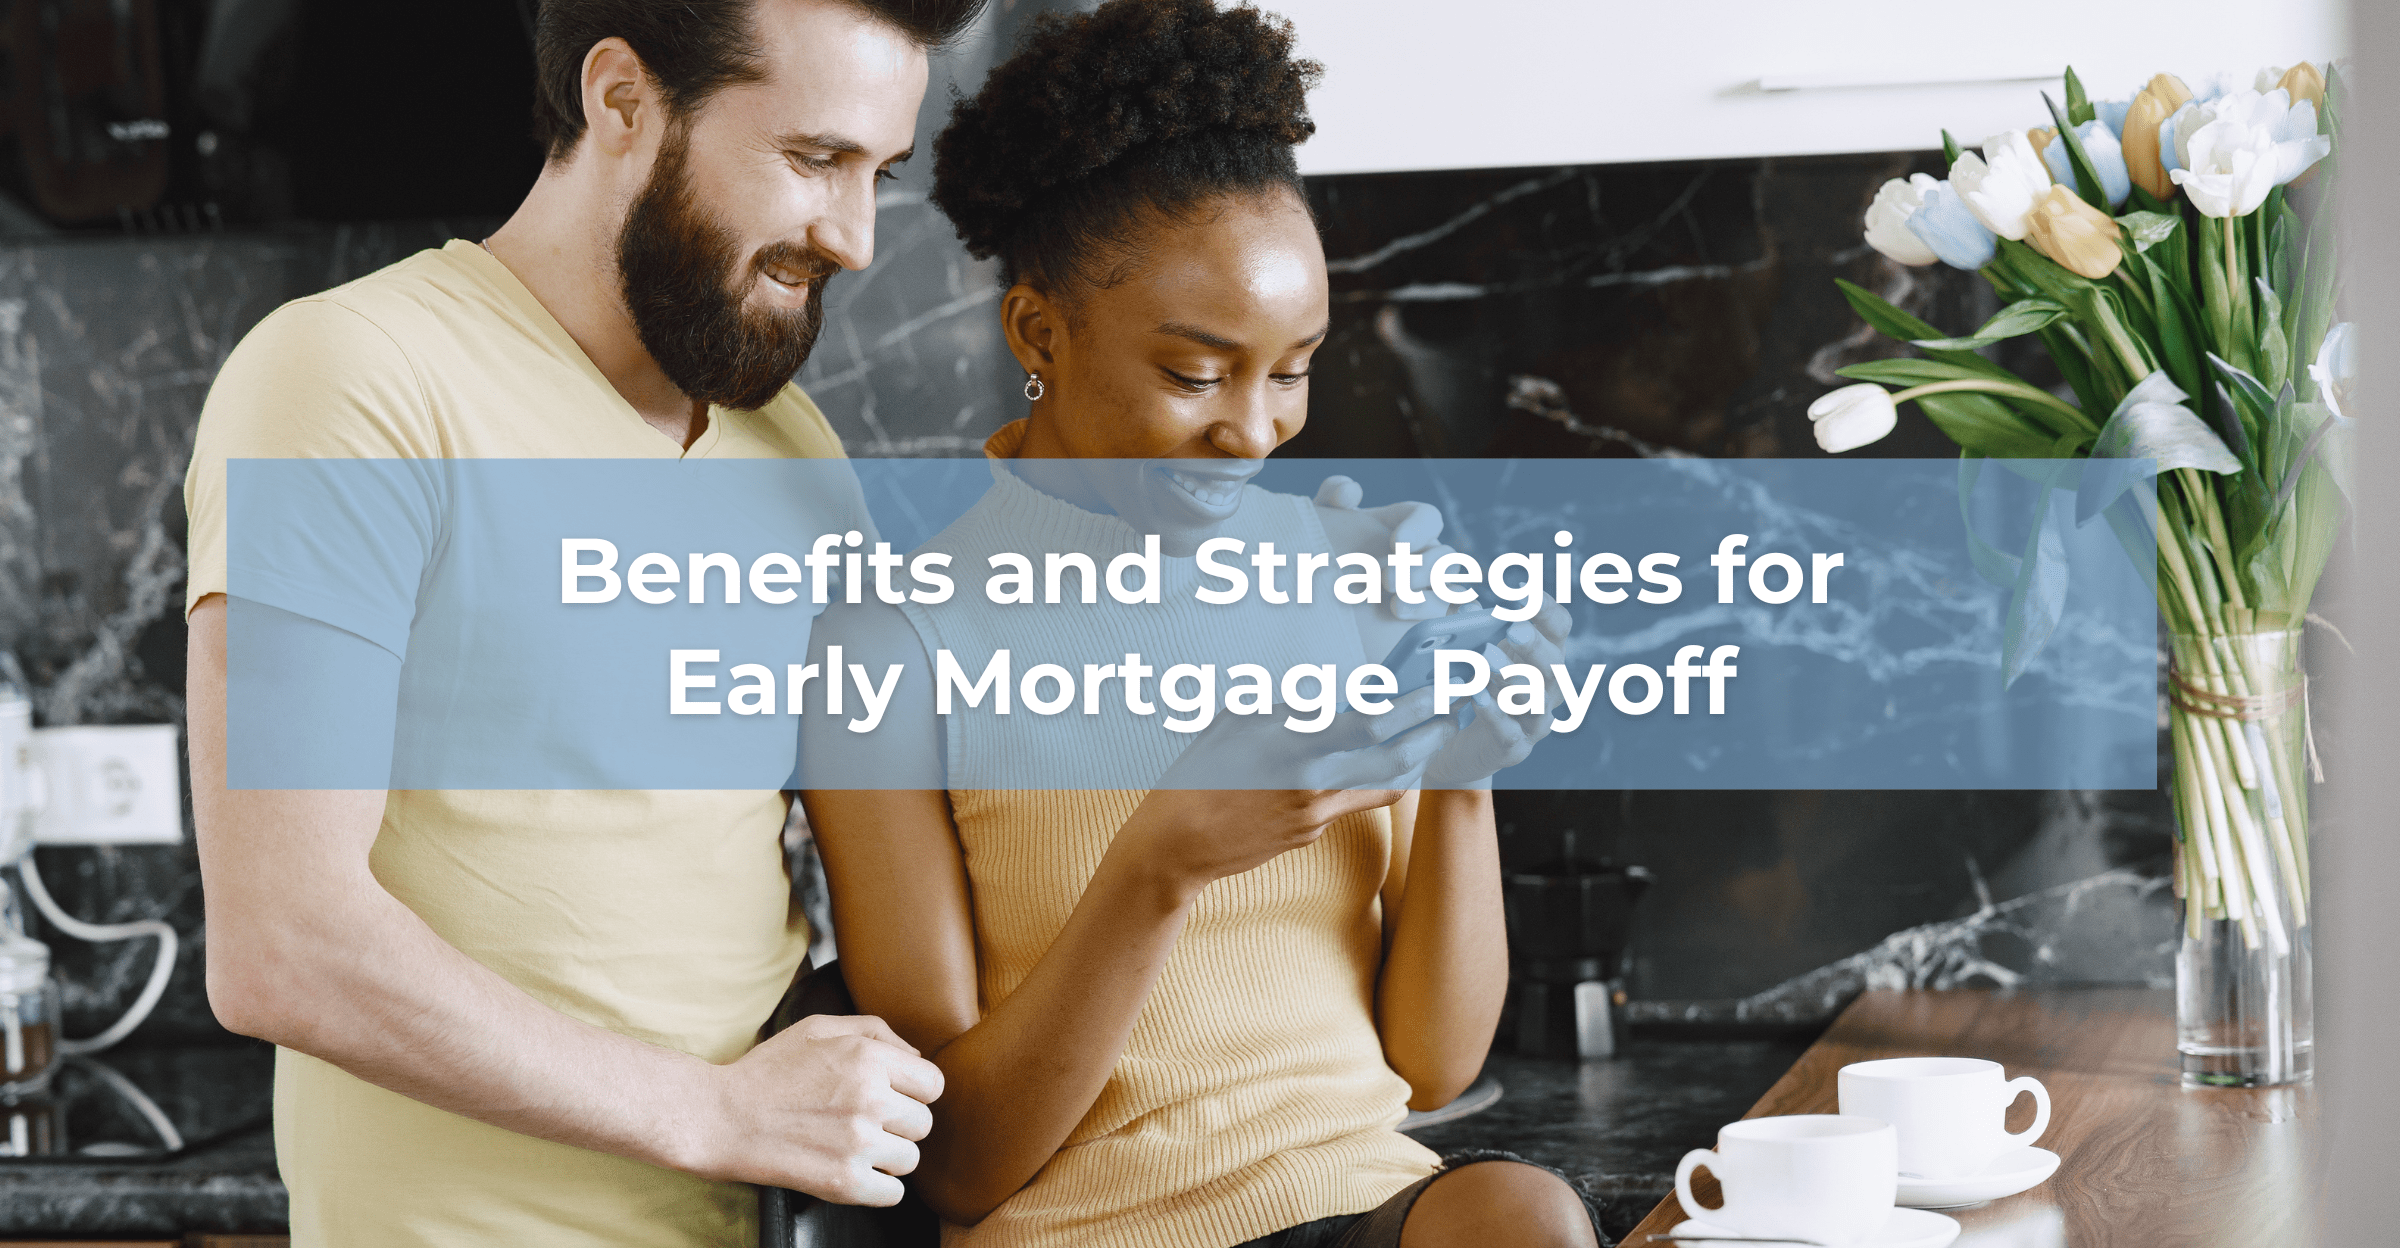 Header Image: Benefits and Strategies for Early Mortgage Payoff